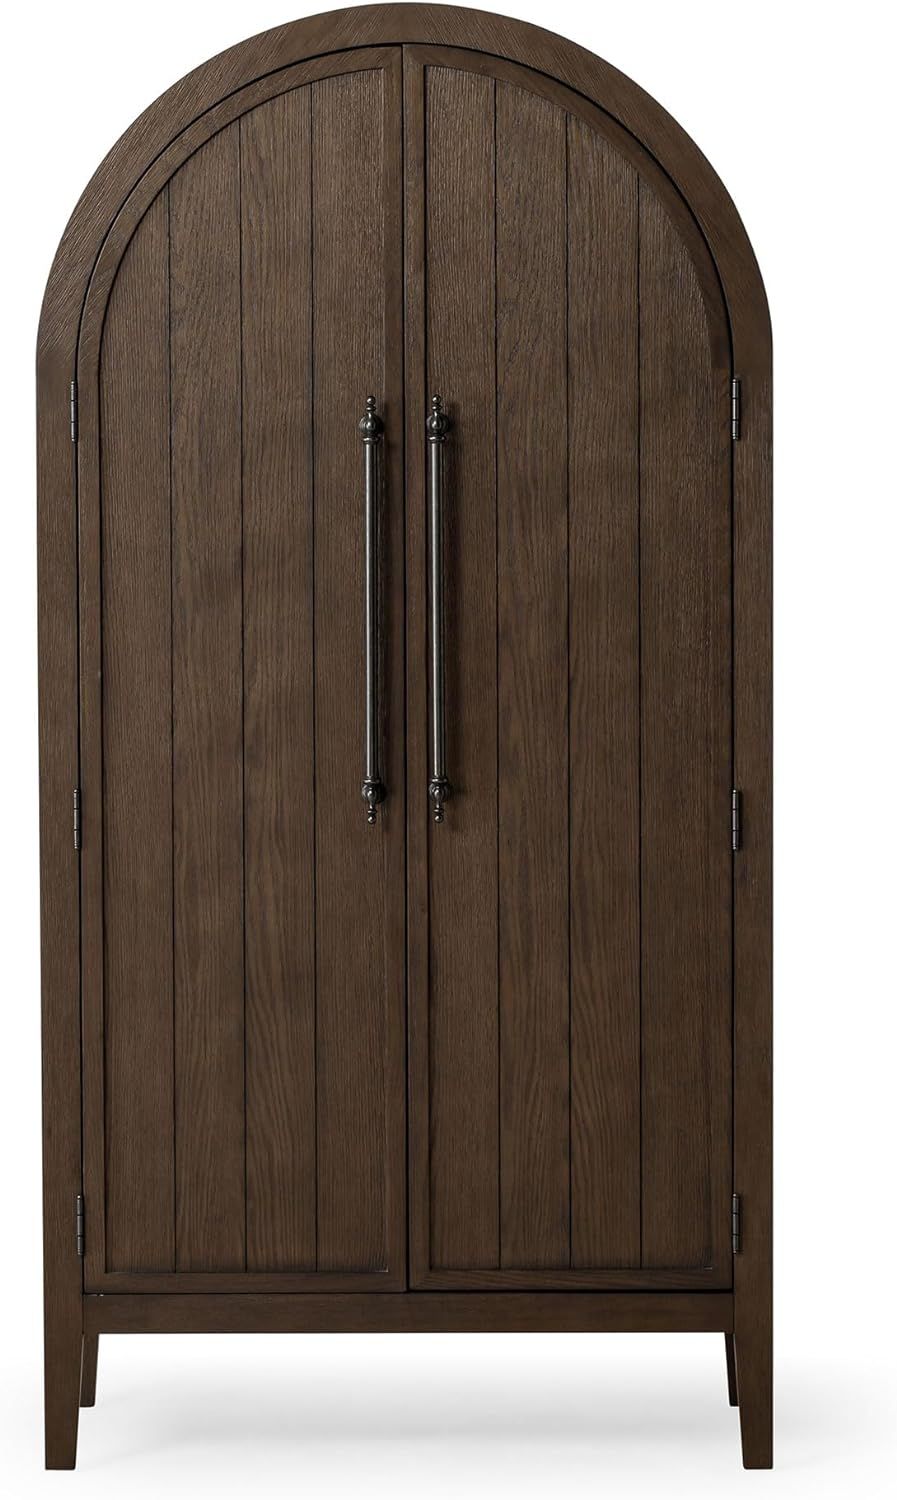 Maven Lane Selene Classical Wooden Cabinet in Antiqued Brown Finish | Amazon (US)